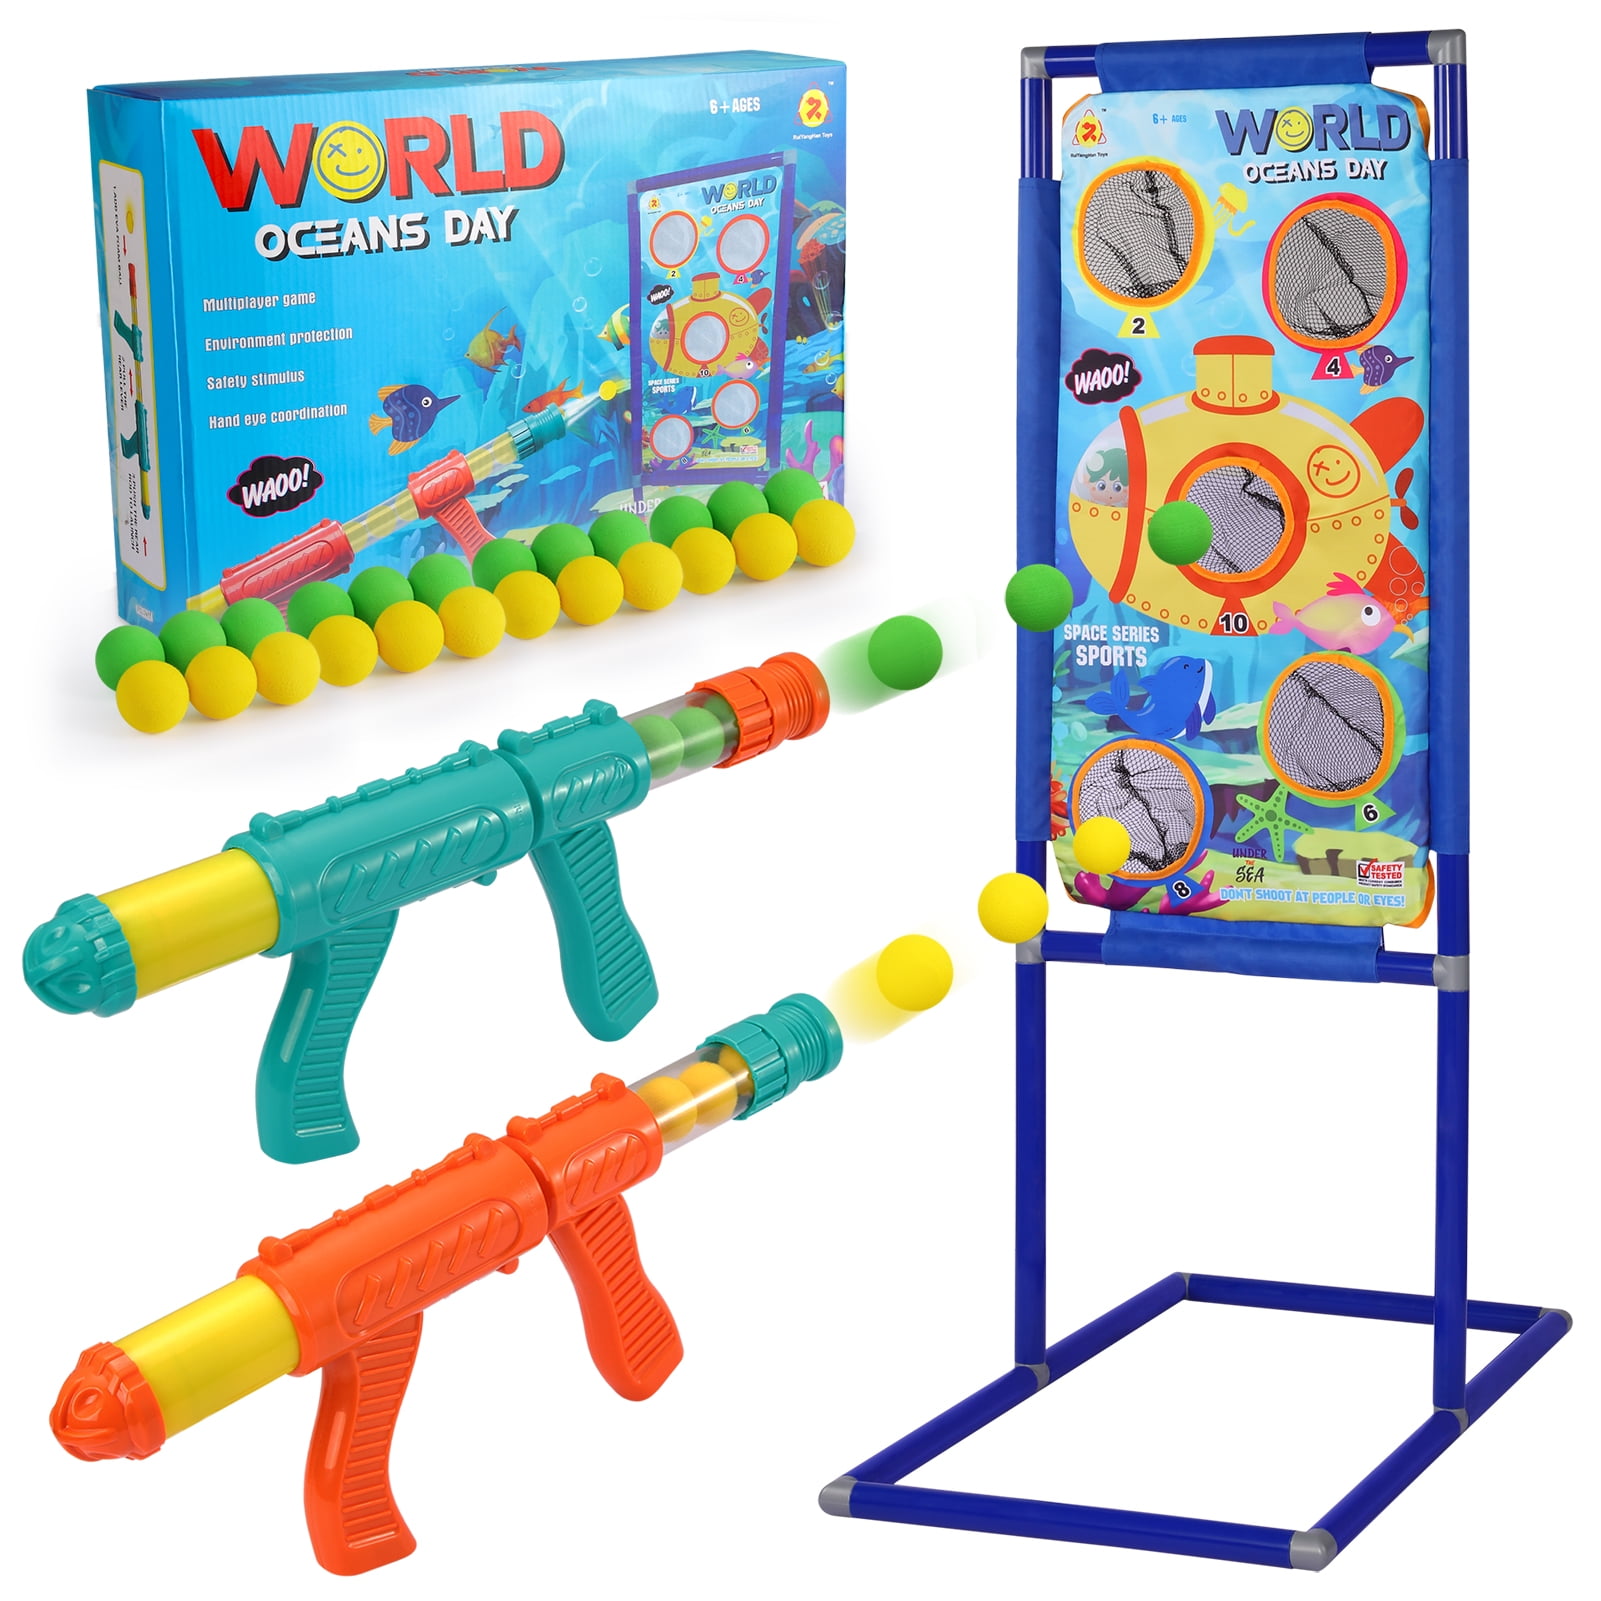 Aeeaying Shooting Game Toy for Kids, 2 Foam Ball Popper Air Toy Guns with Standing Shooting Target and 48 Foam Balls, for Indoor Outdoor Activity Game 